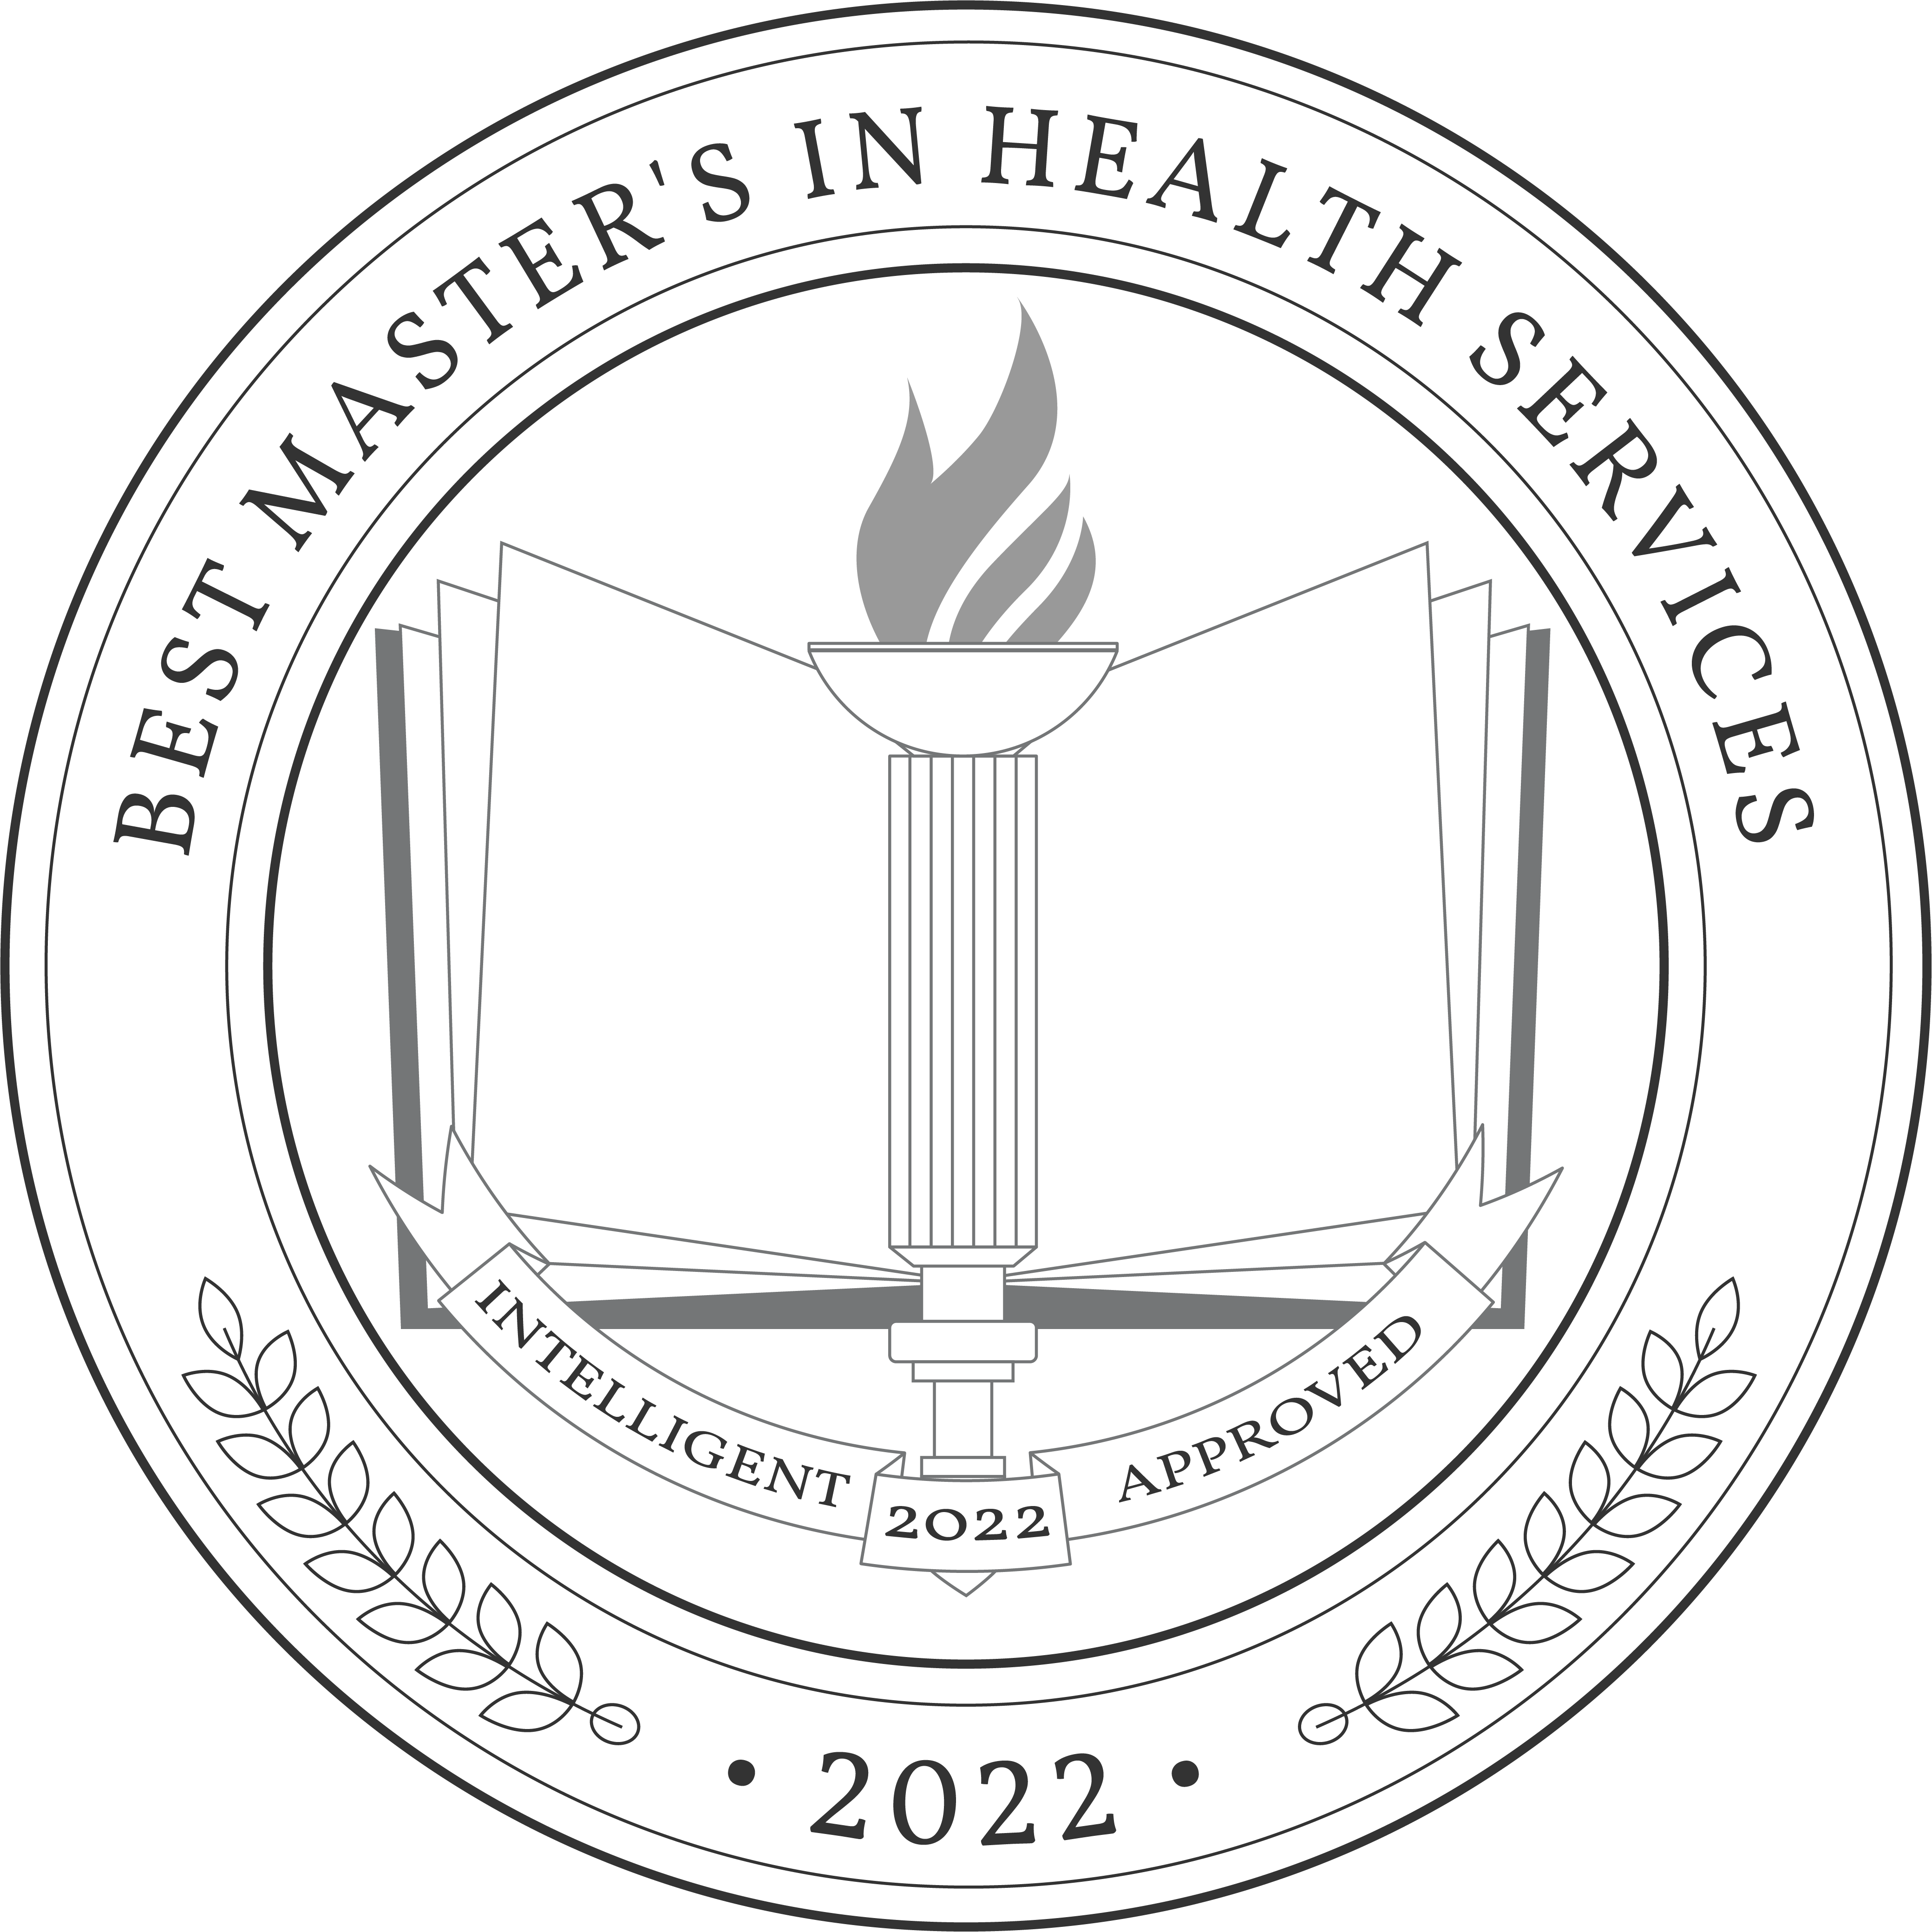 Best Master's in Health Services Badge